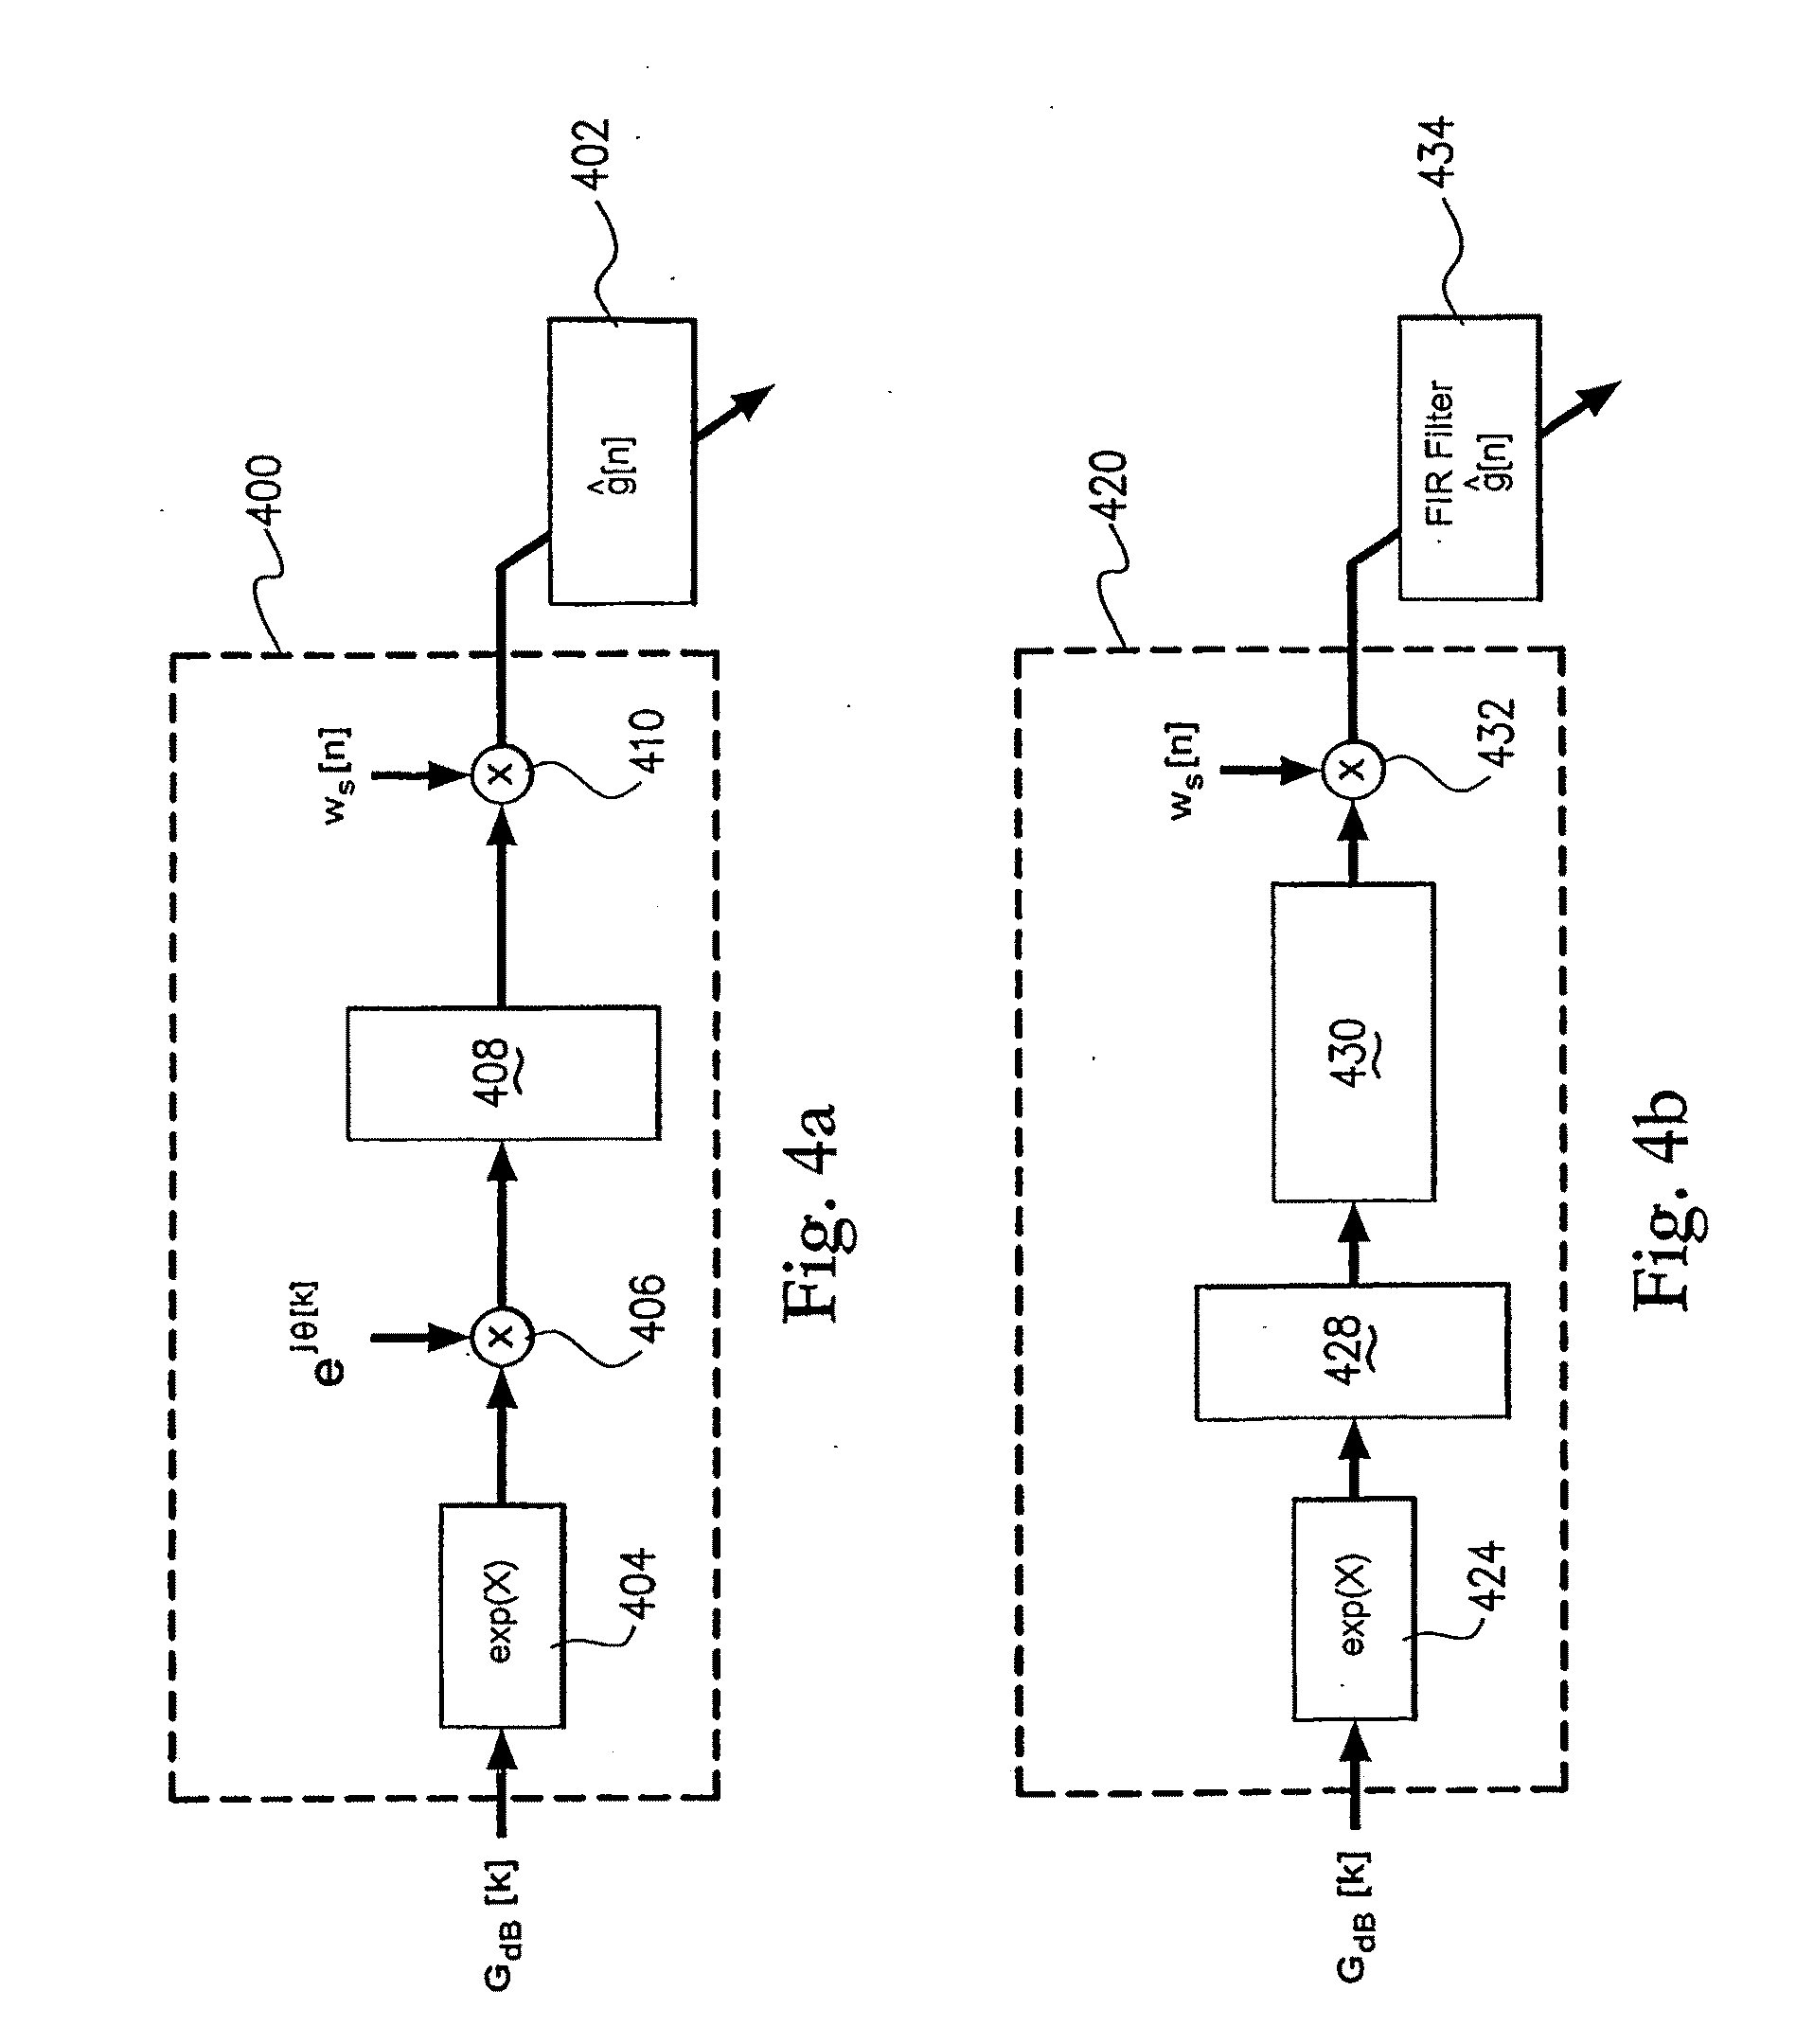 Method and Device for Low Delay Processing